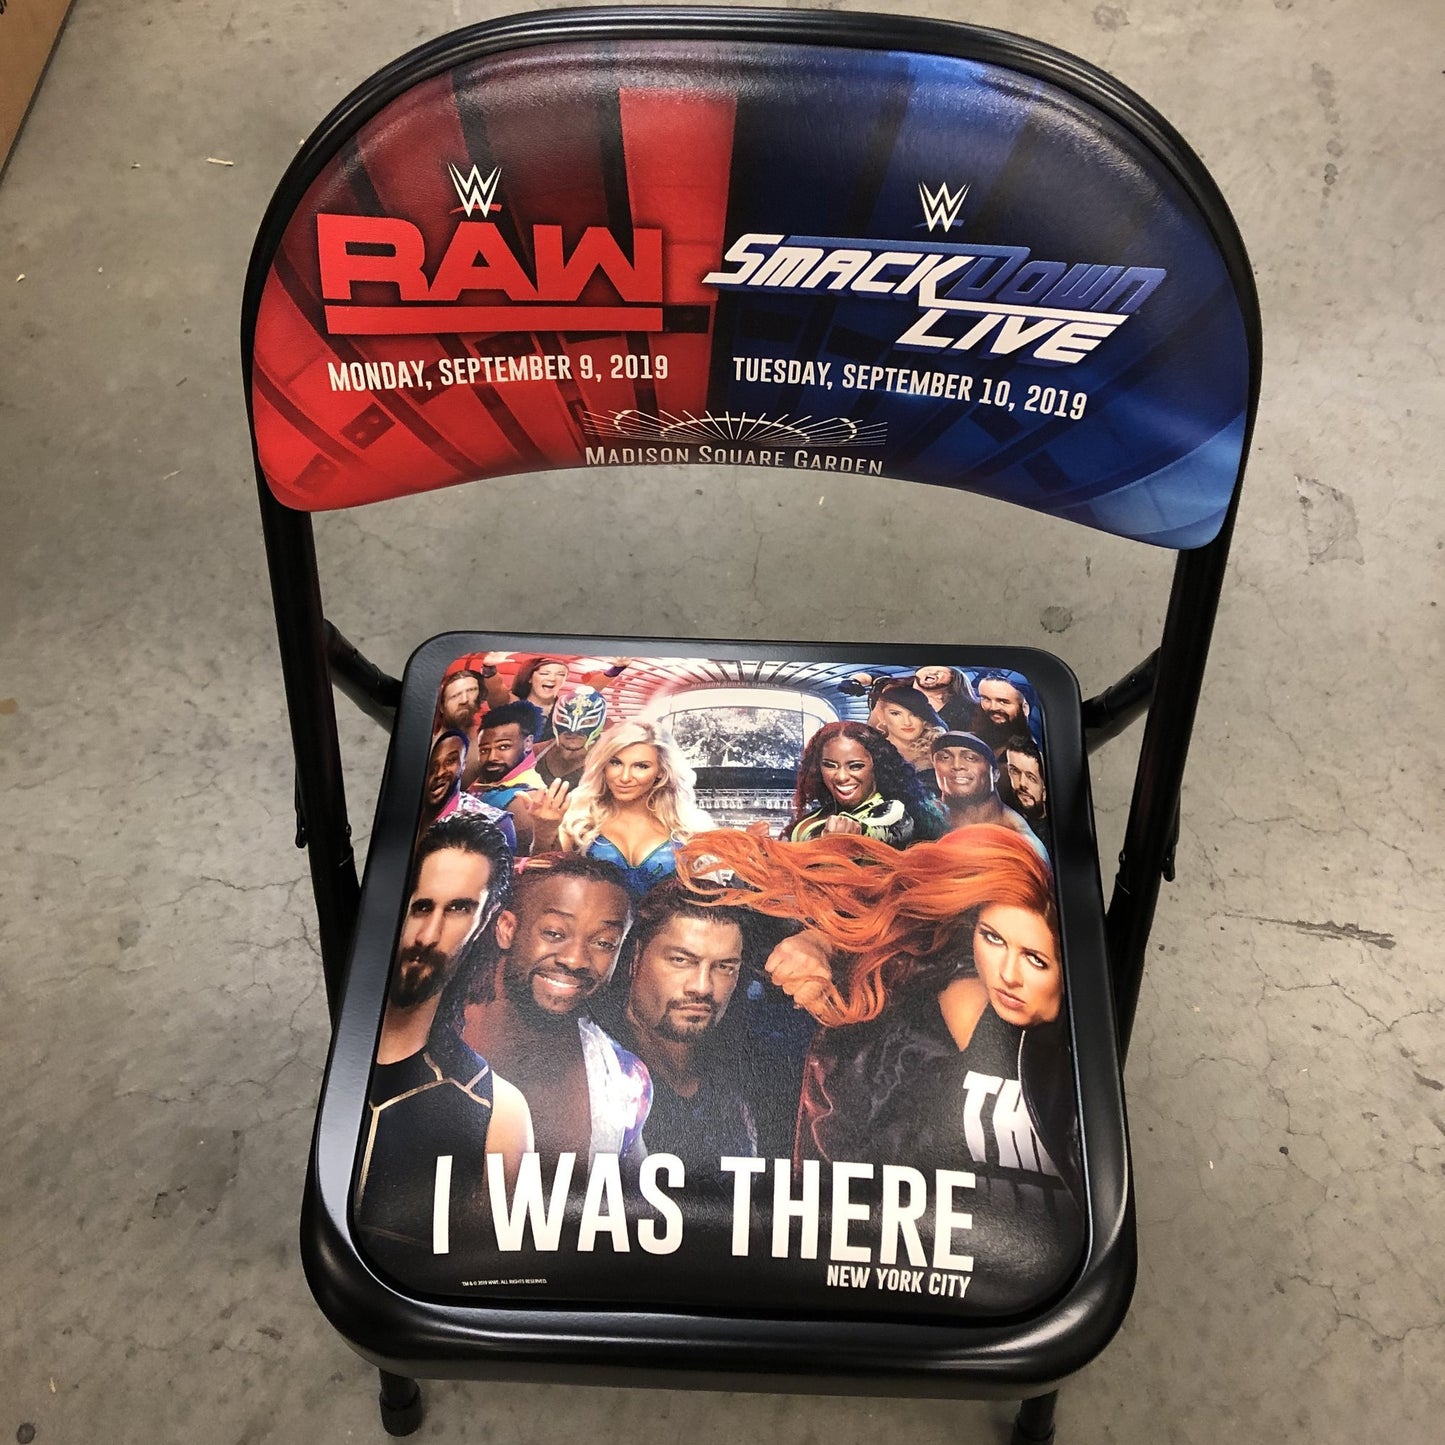 RAW SMACKDOWN LIVE I WAS THERE NYC